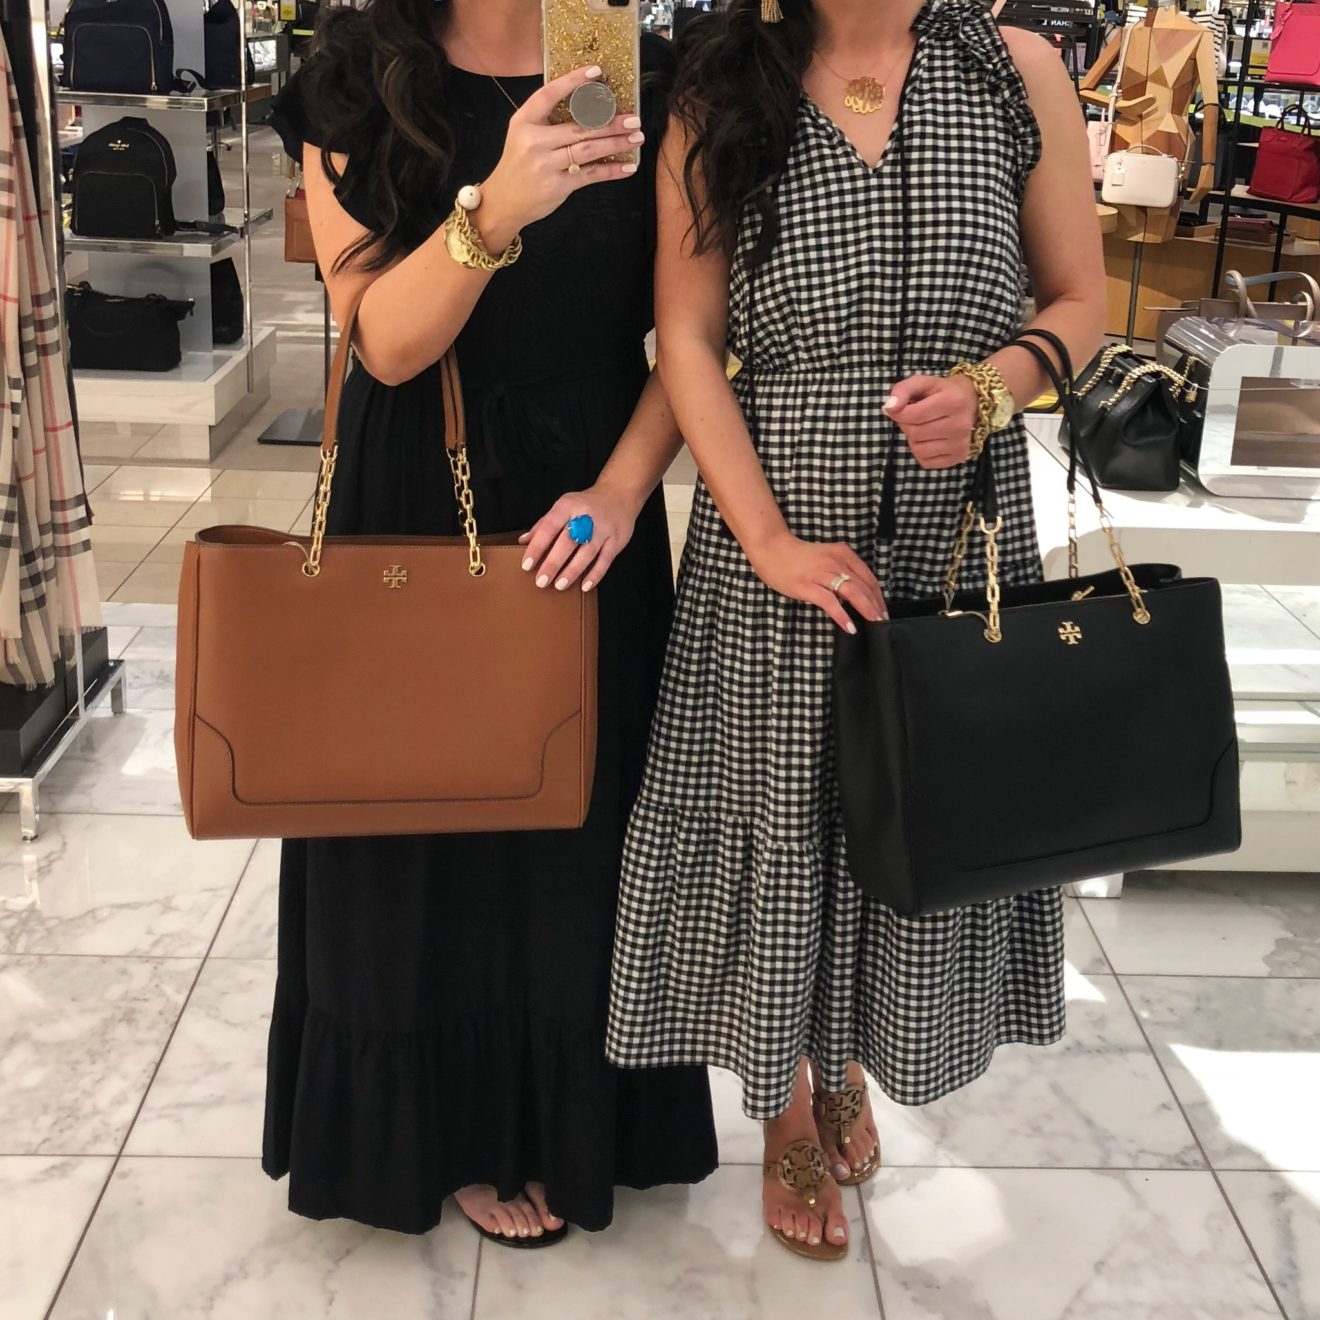 Tory burch totes - The Double Take Girls